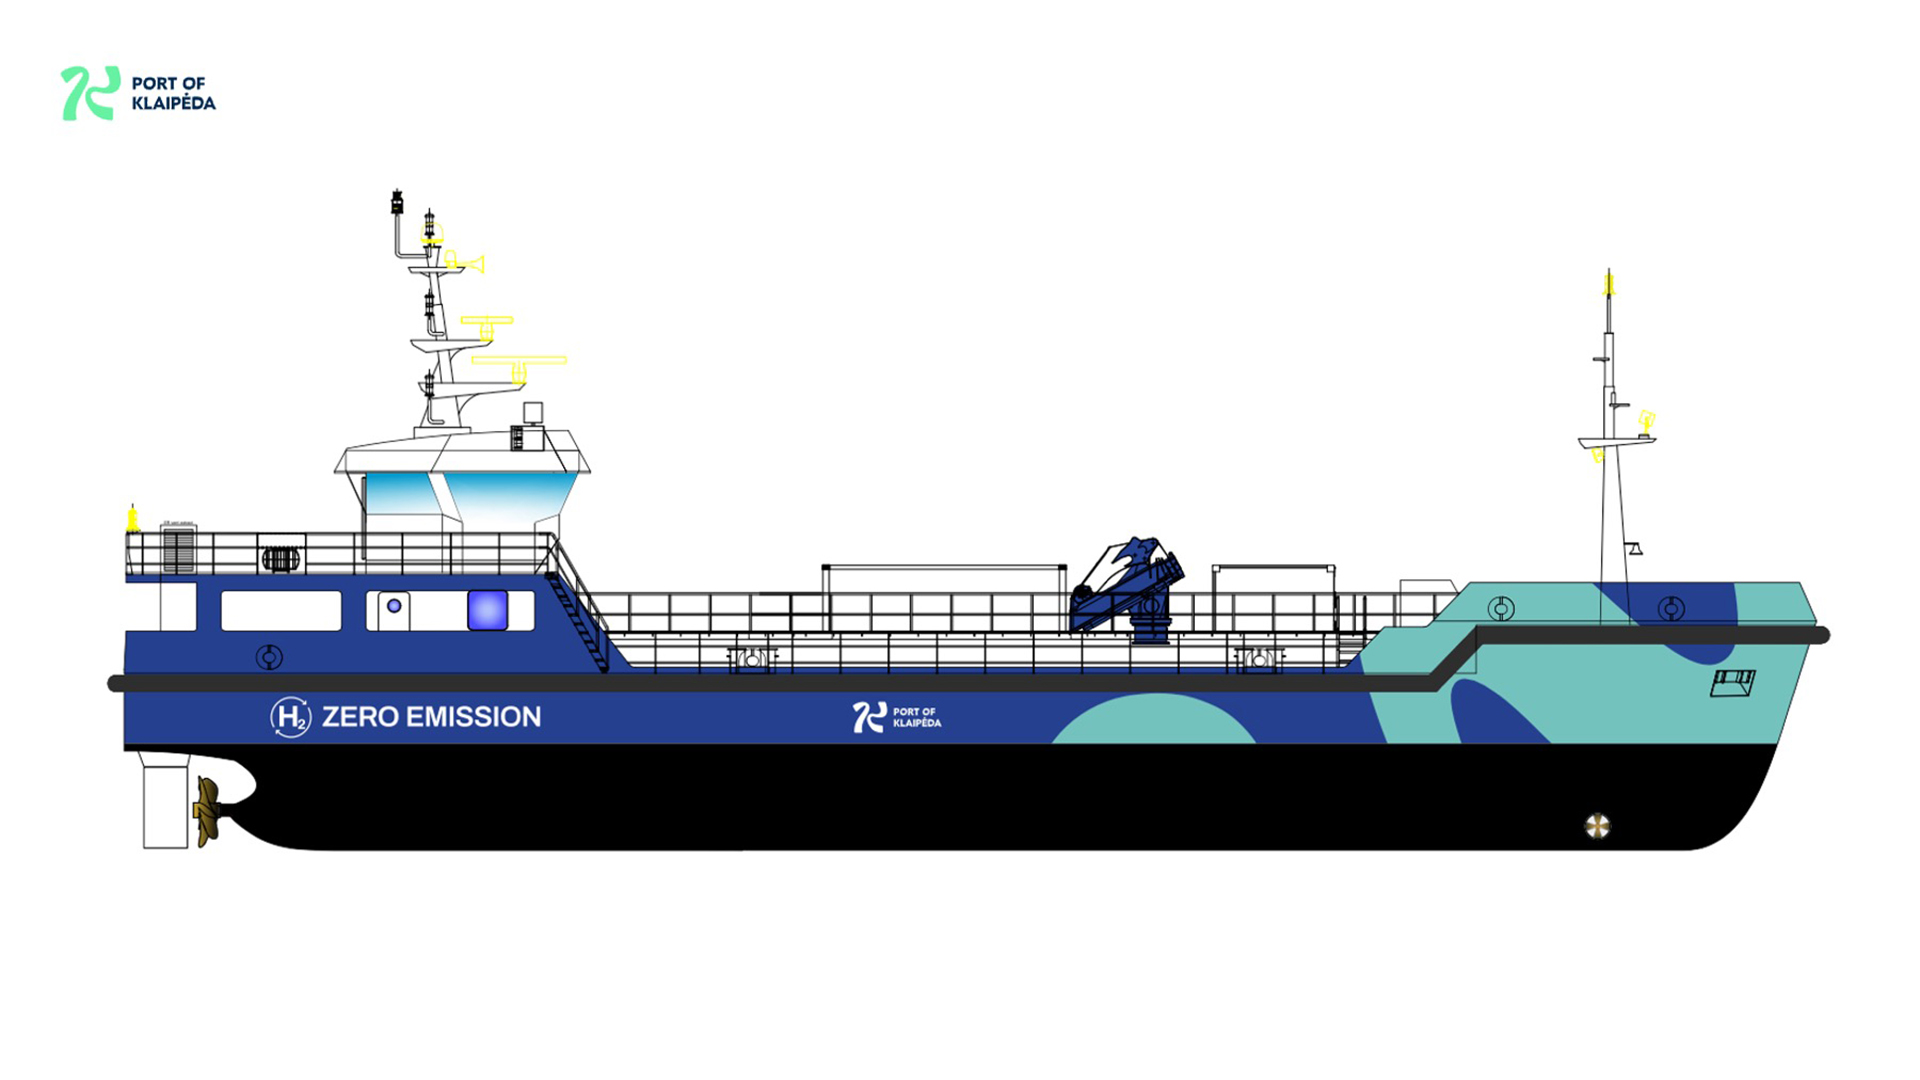 The 42 m long hydrogen-electric powered waste collector destined for Klaipeda Port